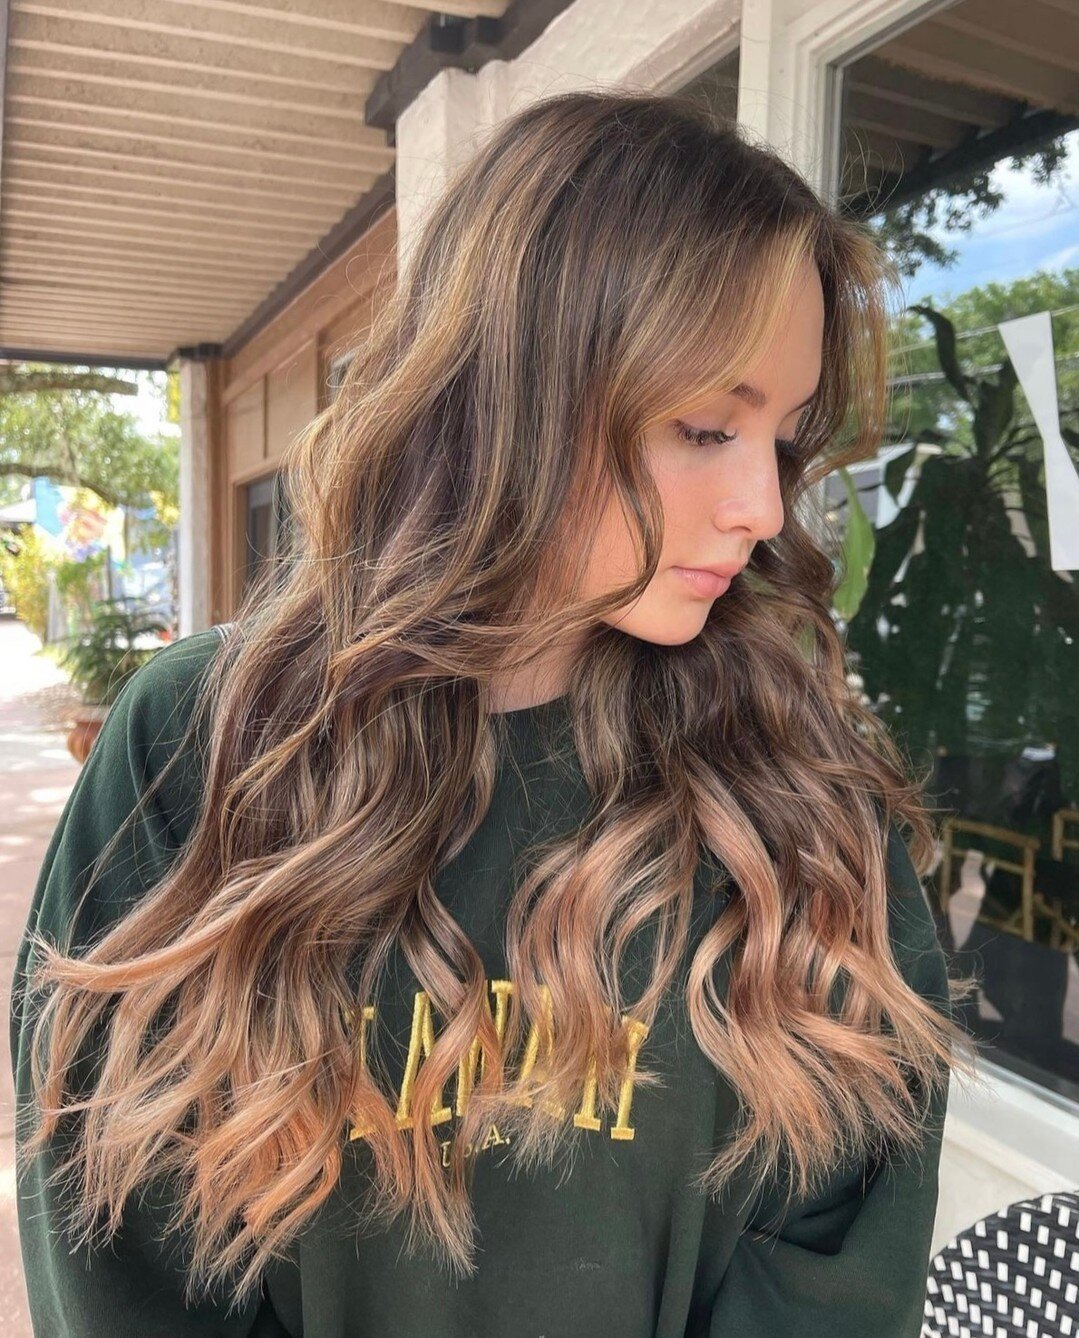 @lexytaylorhair with these custom colored 20 inch @bellamihair extensions 😍⁠
⁠
For appointments: 📞 (337)661-9824⁠
.⁠
.⁠
.⁠
#orlandostylists #hairstylistorlando #stylistorlando #salonowners #salonlife #aroundorlando #orlandohairspecialist #orlandocu